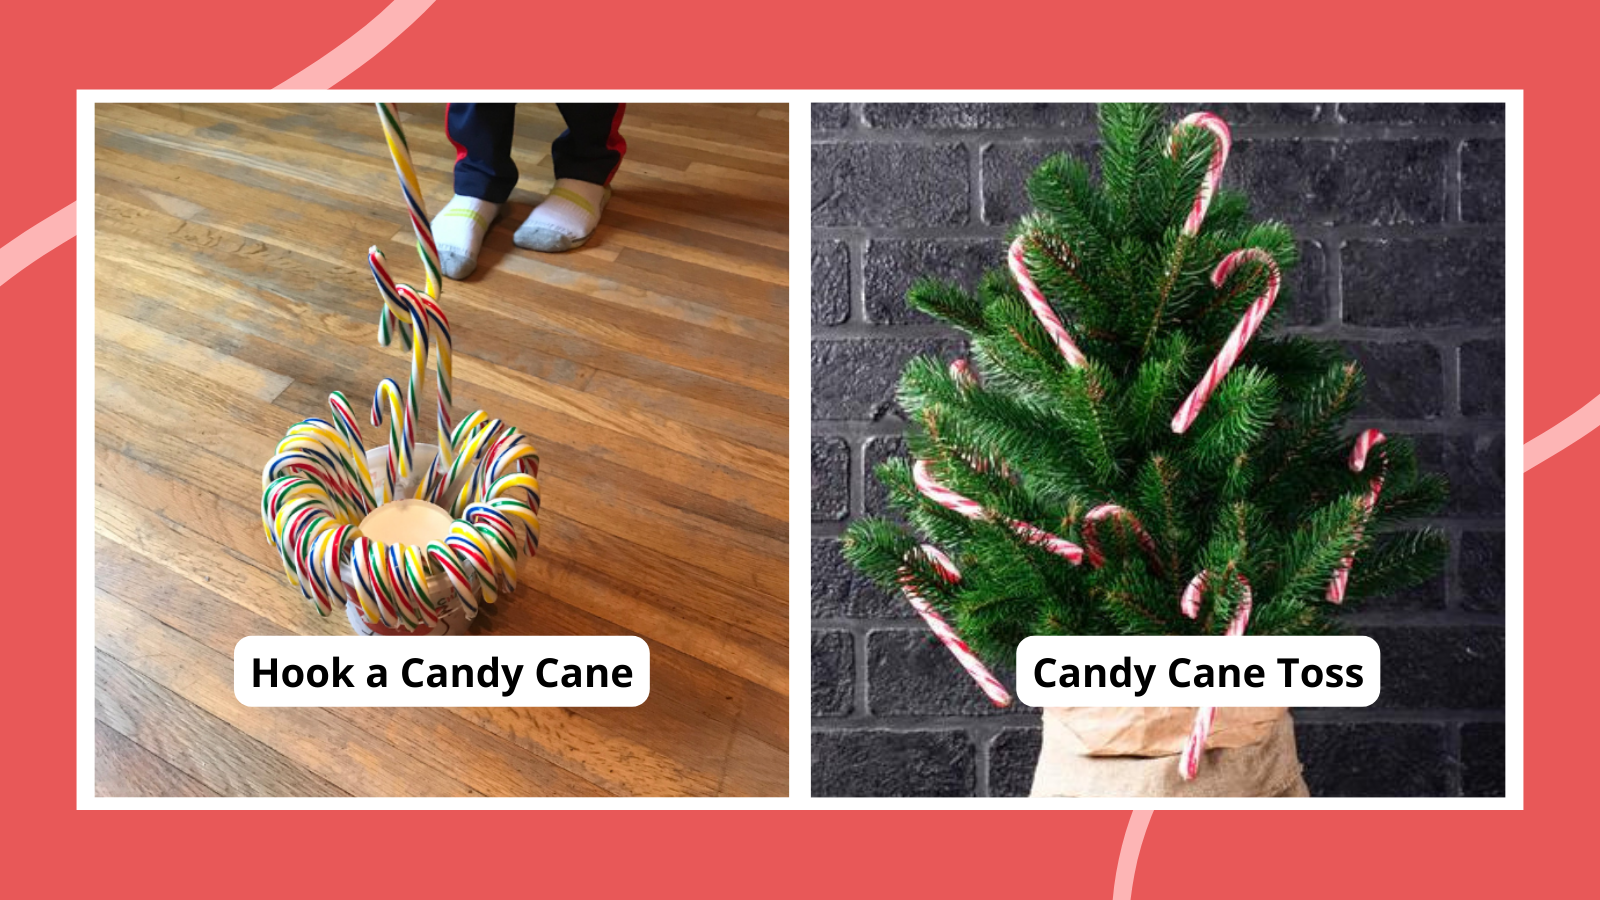 candy cane games toss a candy cane and fishing for candy canes